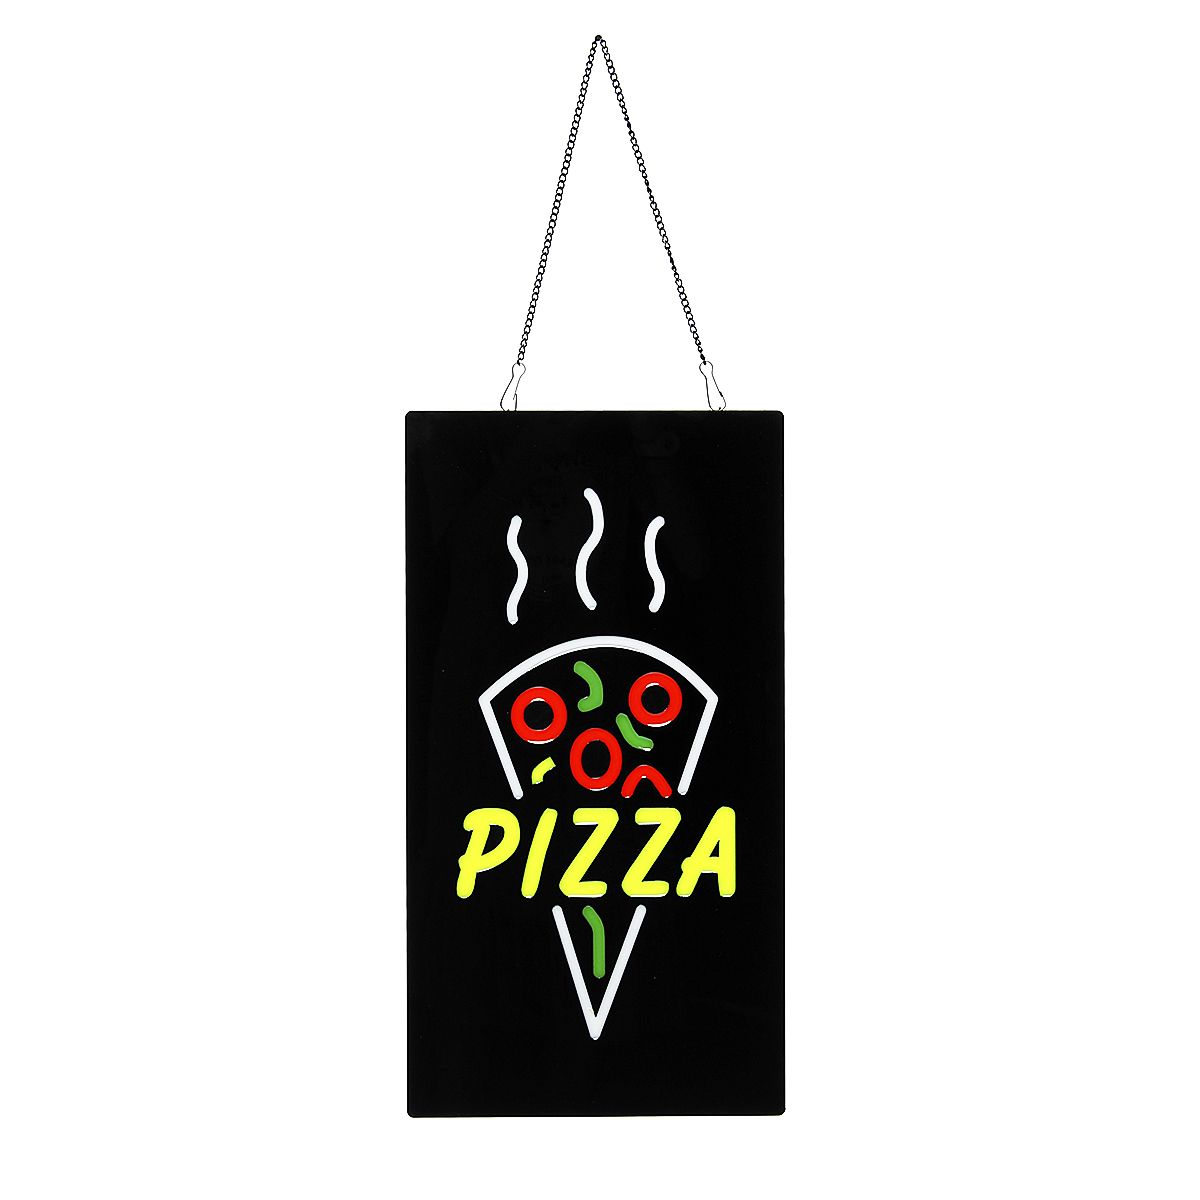 Pizza-LED-Wall-Hanging-Sign-Light-Board-Pub-Club-Party-Door-Display-Lamp-Decorations-1660374